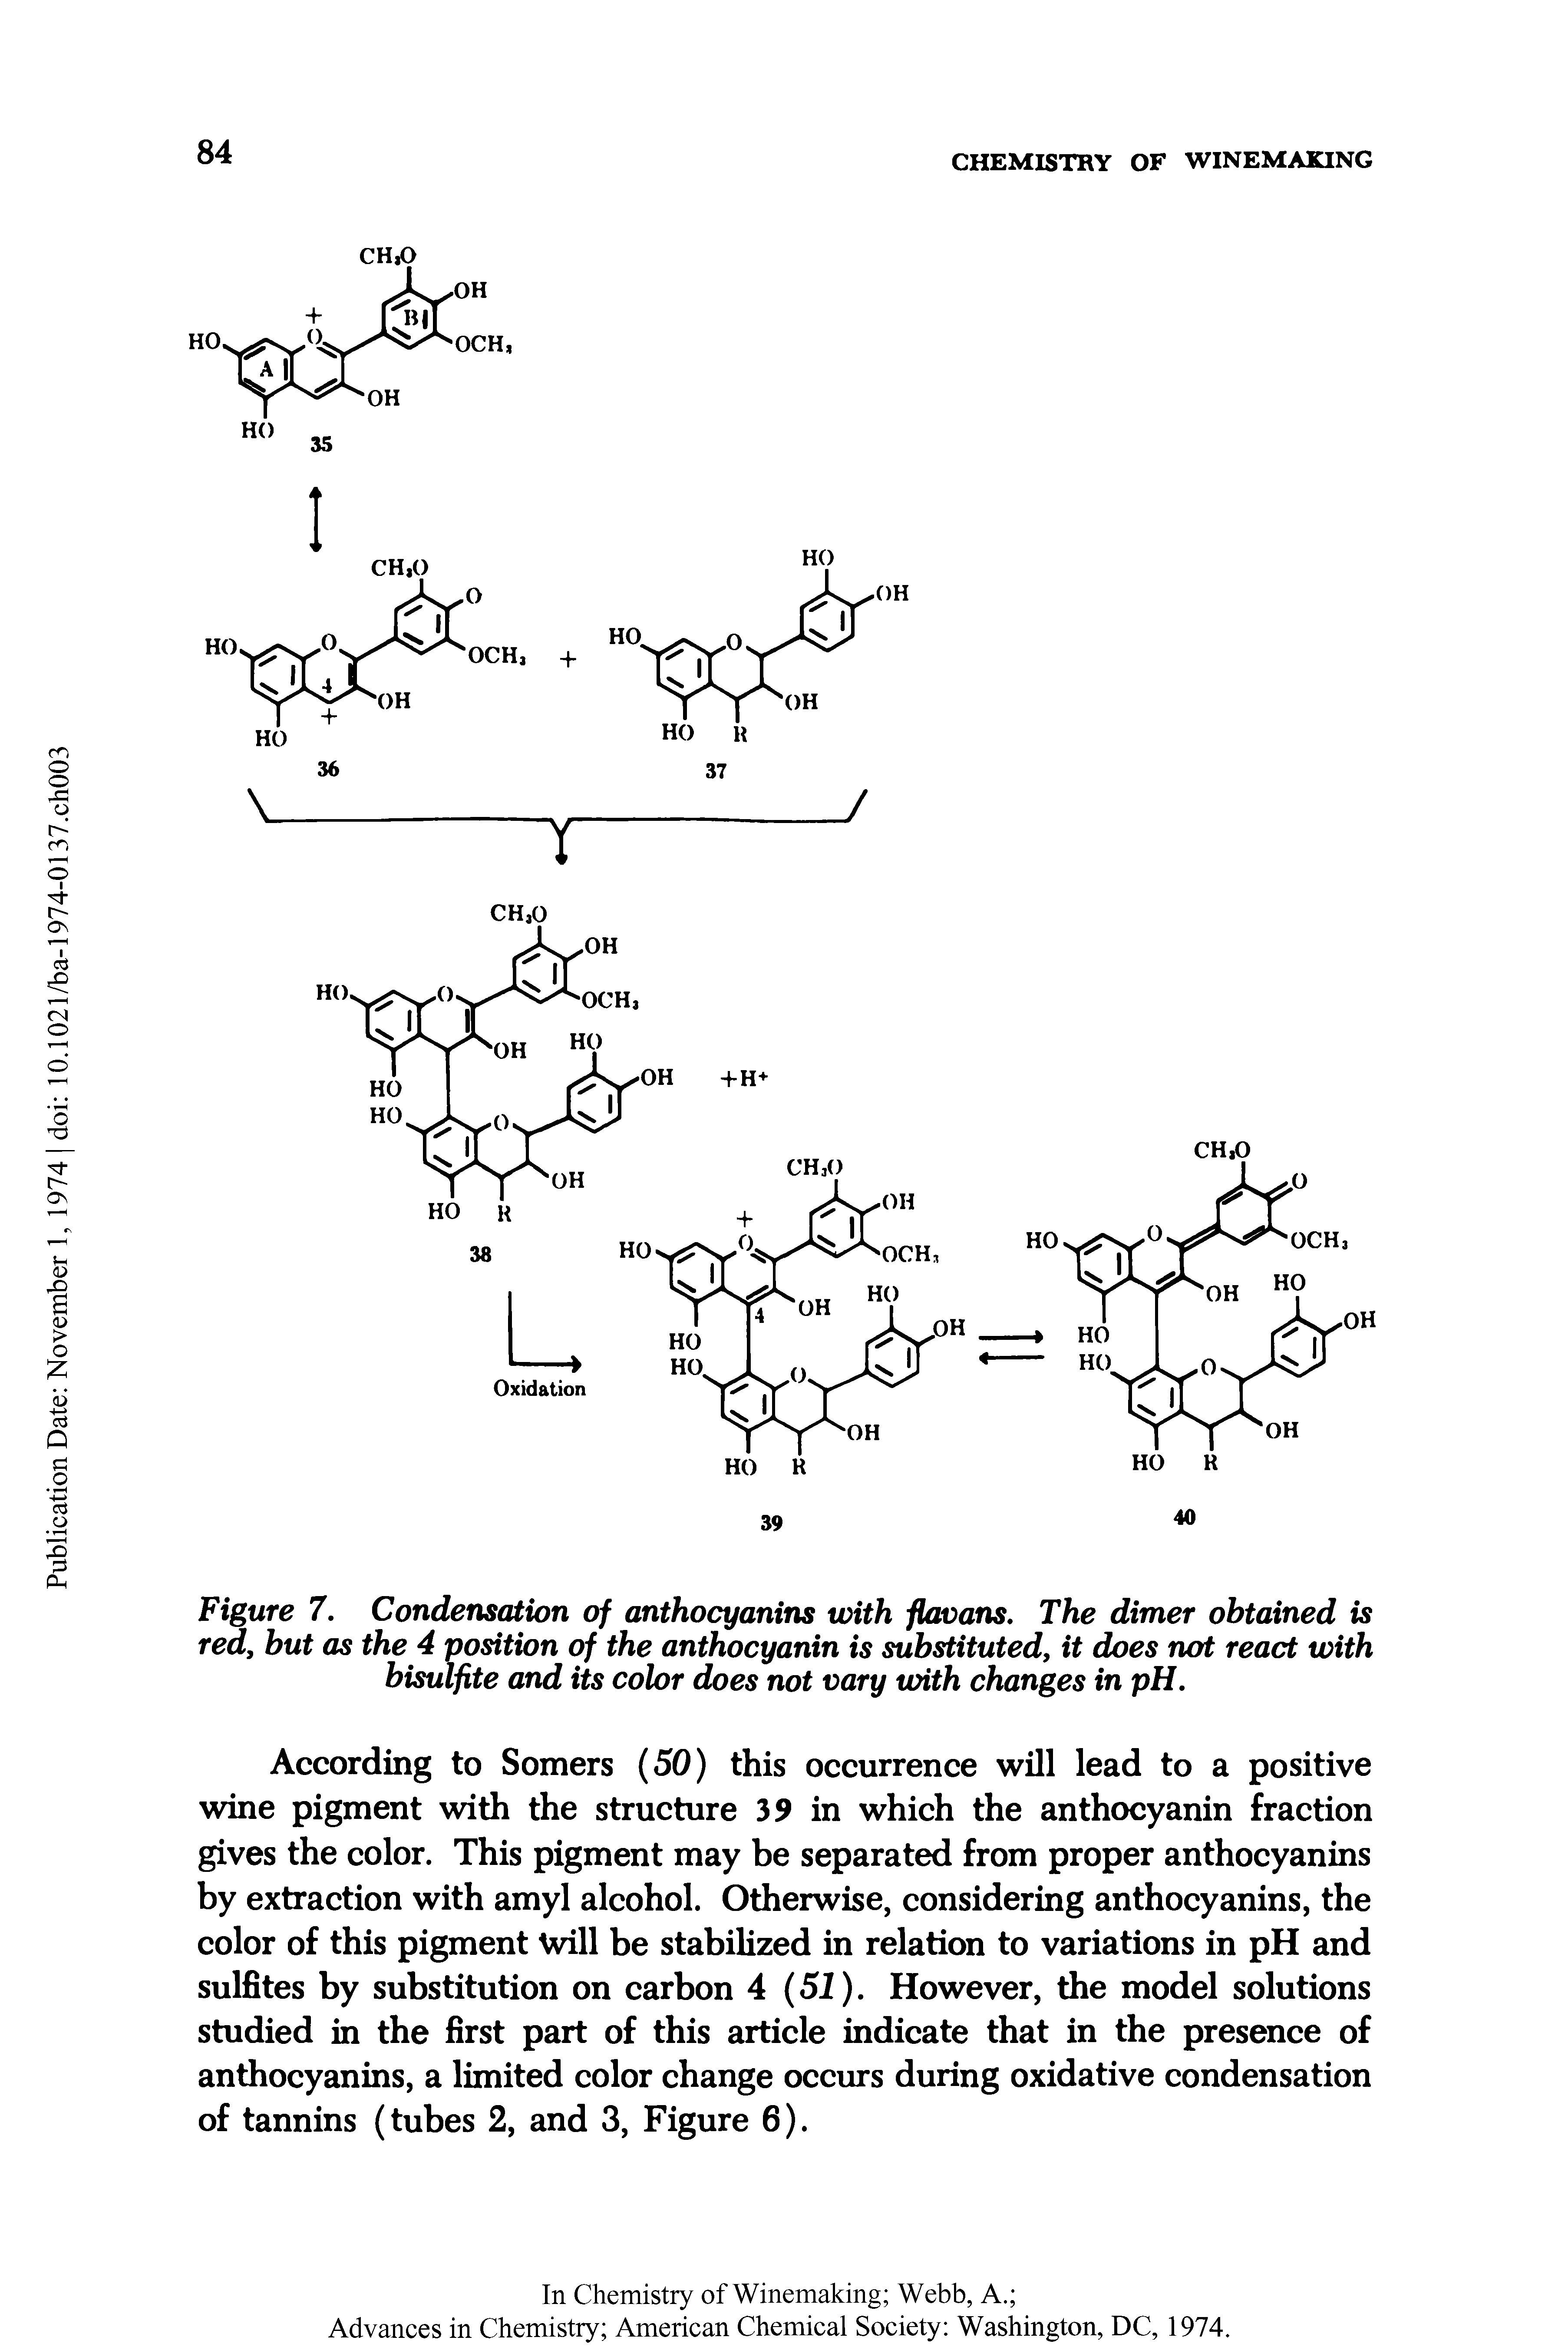 Figure 7. Condensation of anthocyanins with flavans. The dimer obtained is red, but as the 4 position of the anthocyanin is substituted, it does not react with bisulfite and its color does not vary with changes in pH.